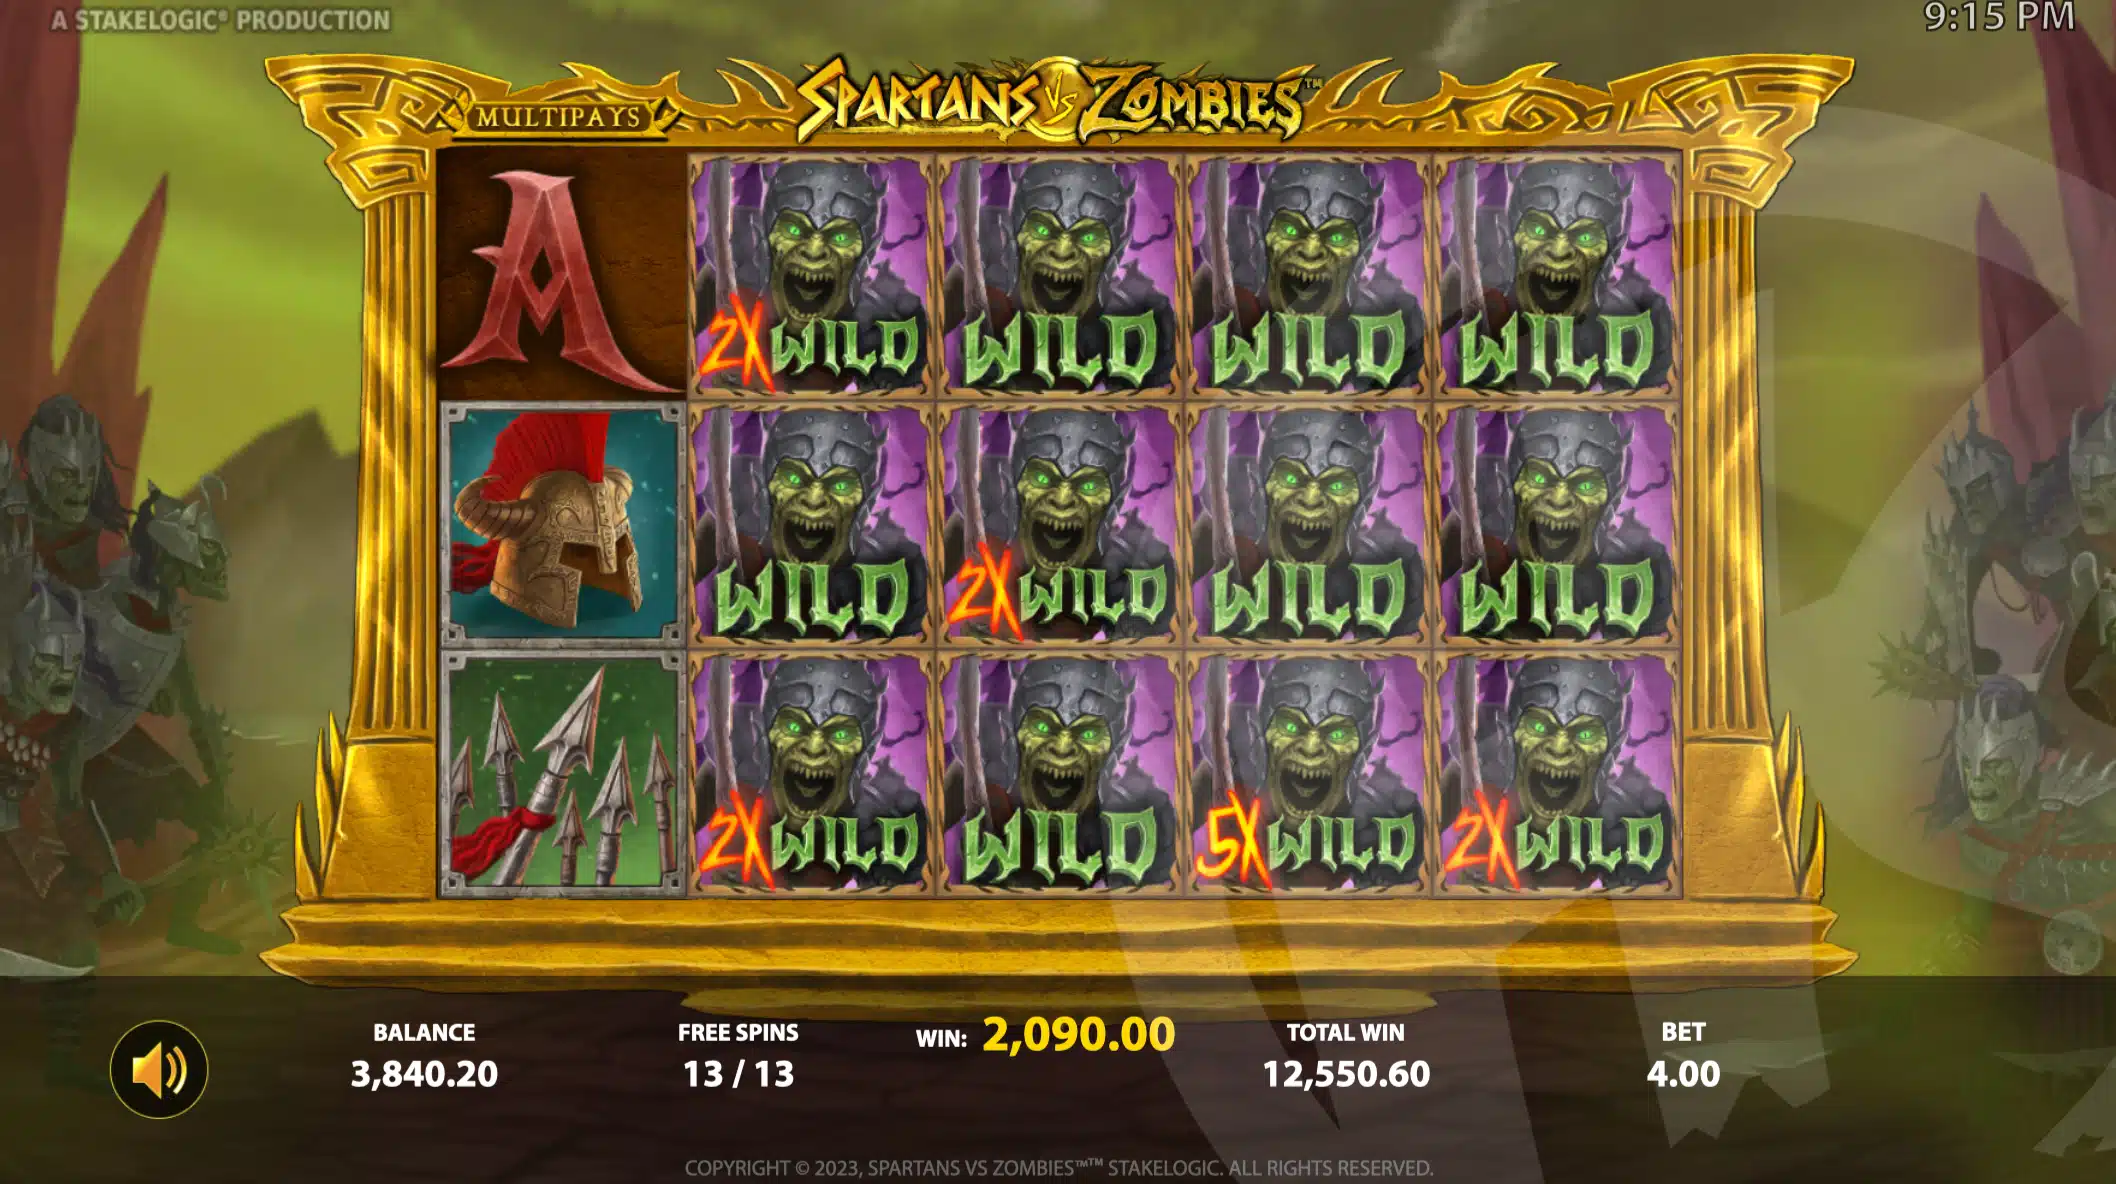 Spartans vs Zombies Zombie Free Spins